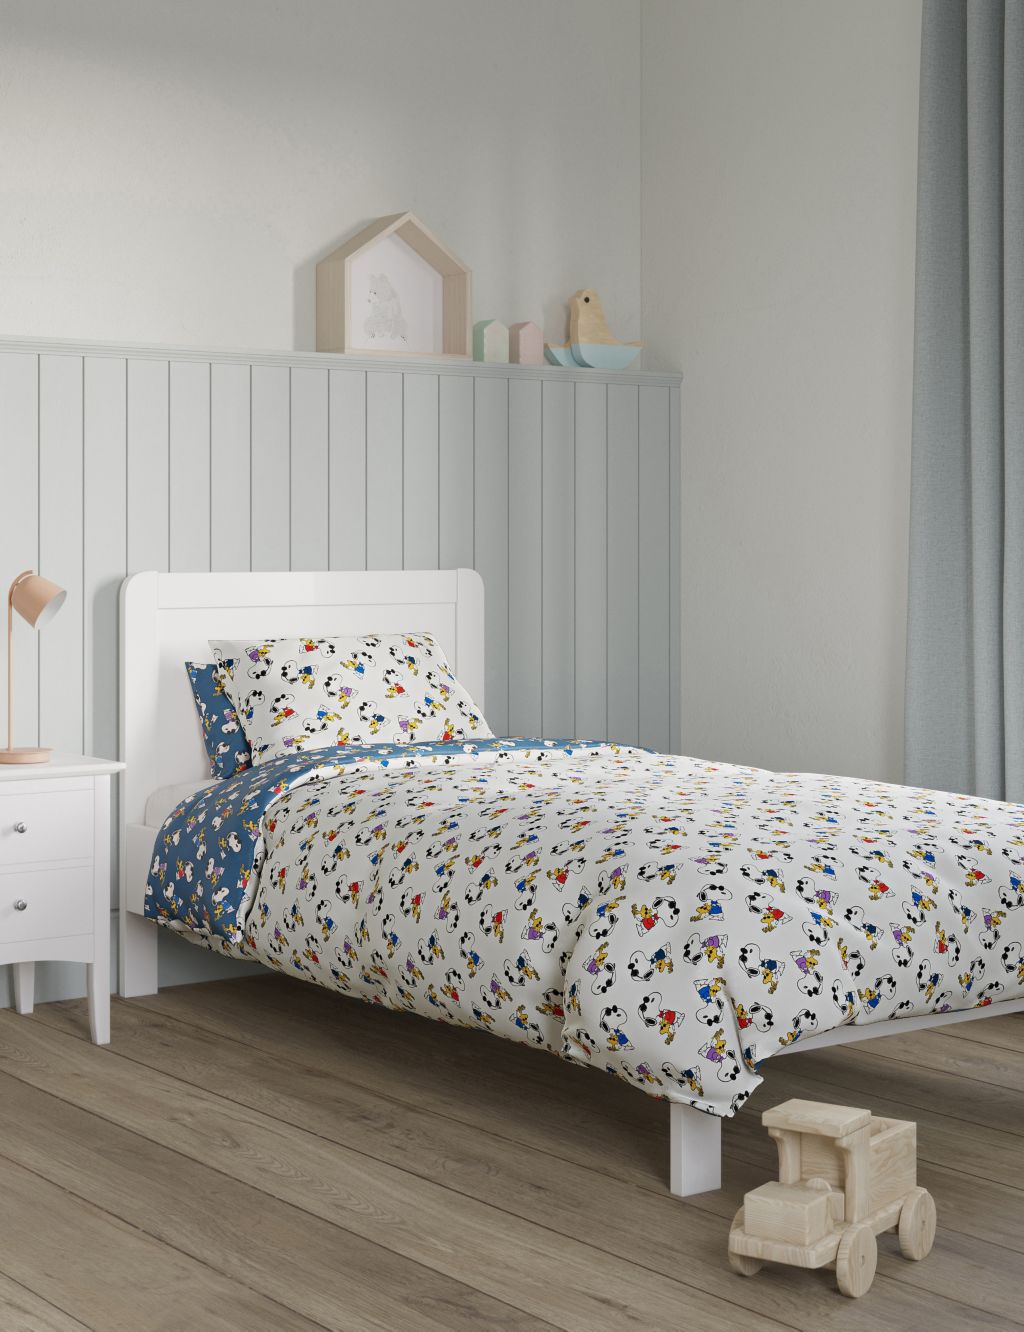 Snoopy™ & Woodstock Pure Cotton Bedding Set image 3